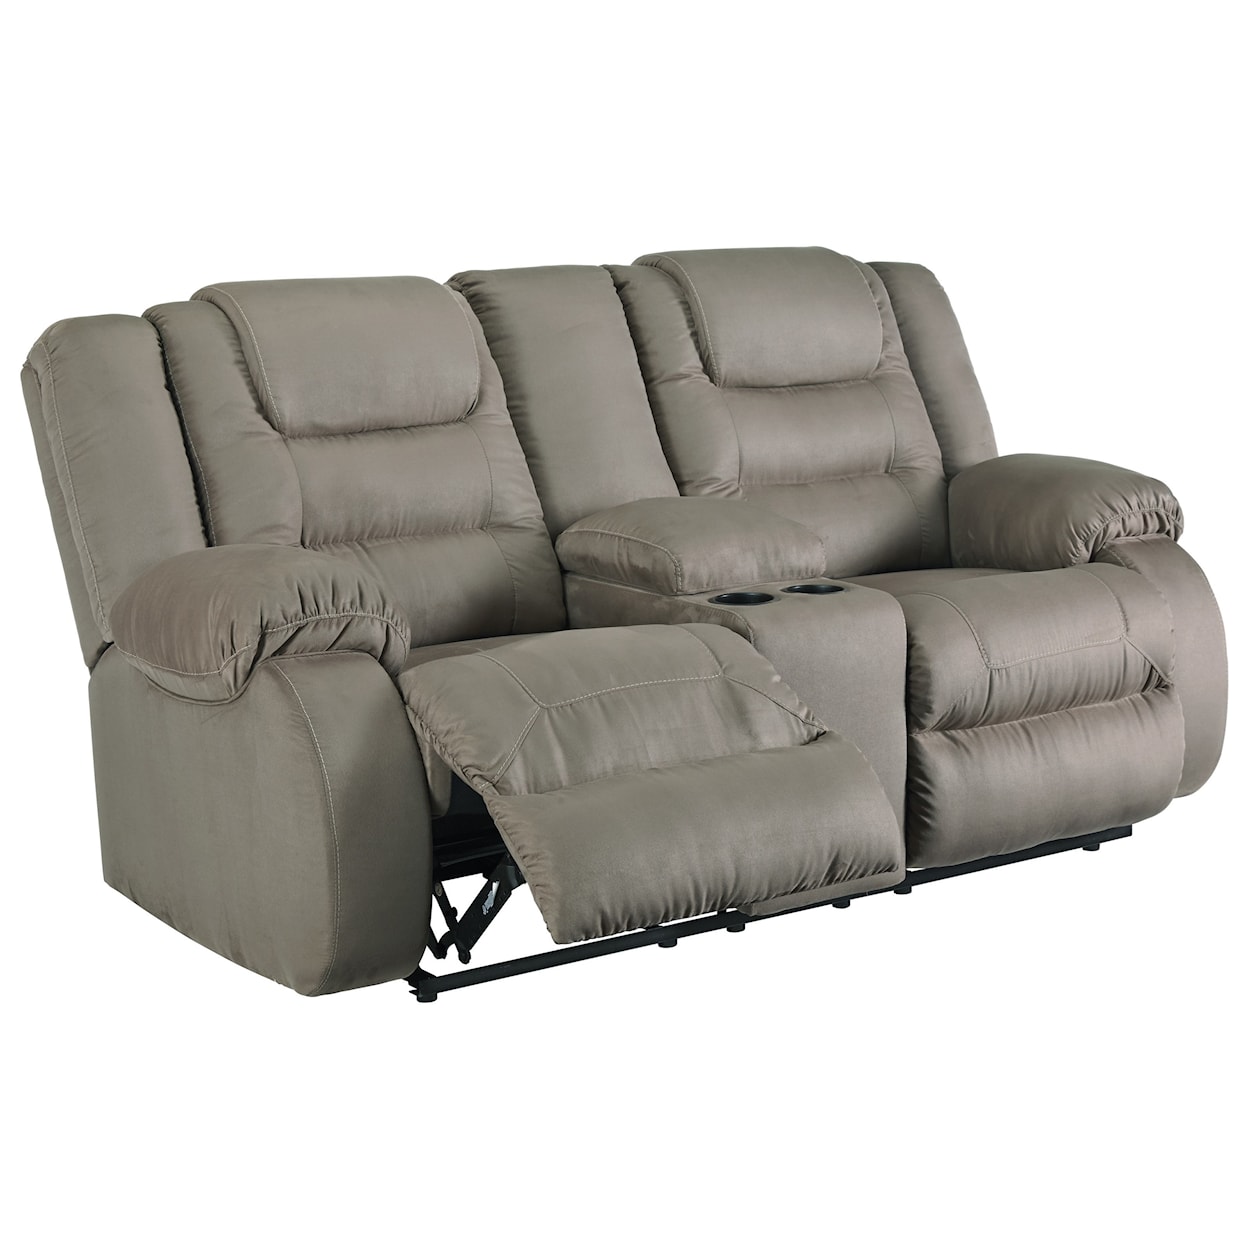 Signature Design by Ashley McCade Double Reclining Loveseat with Console